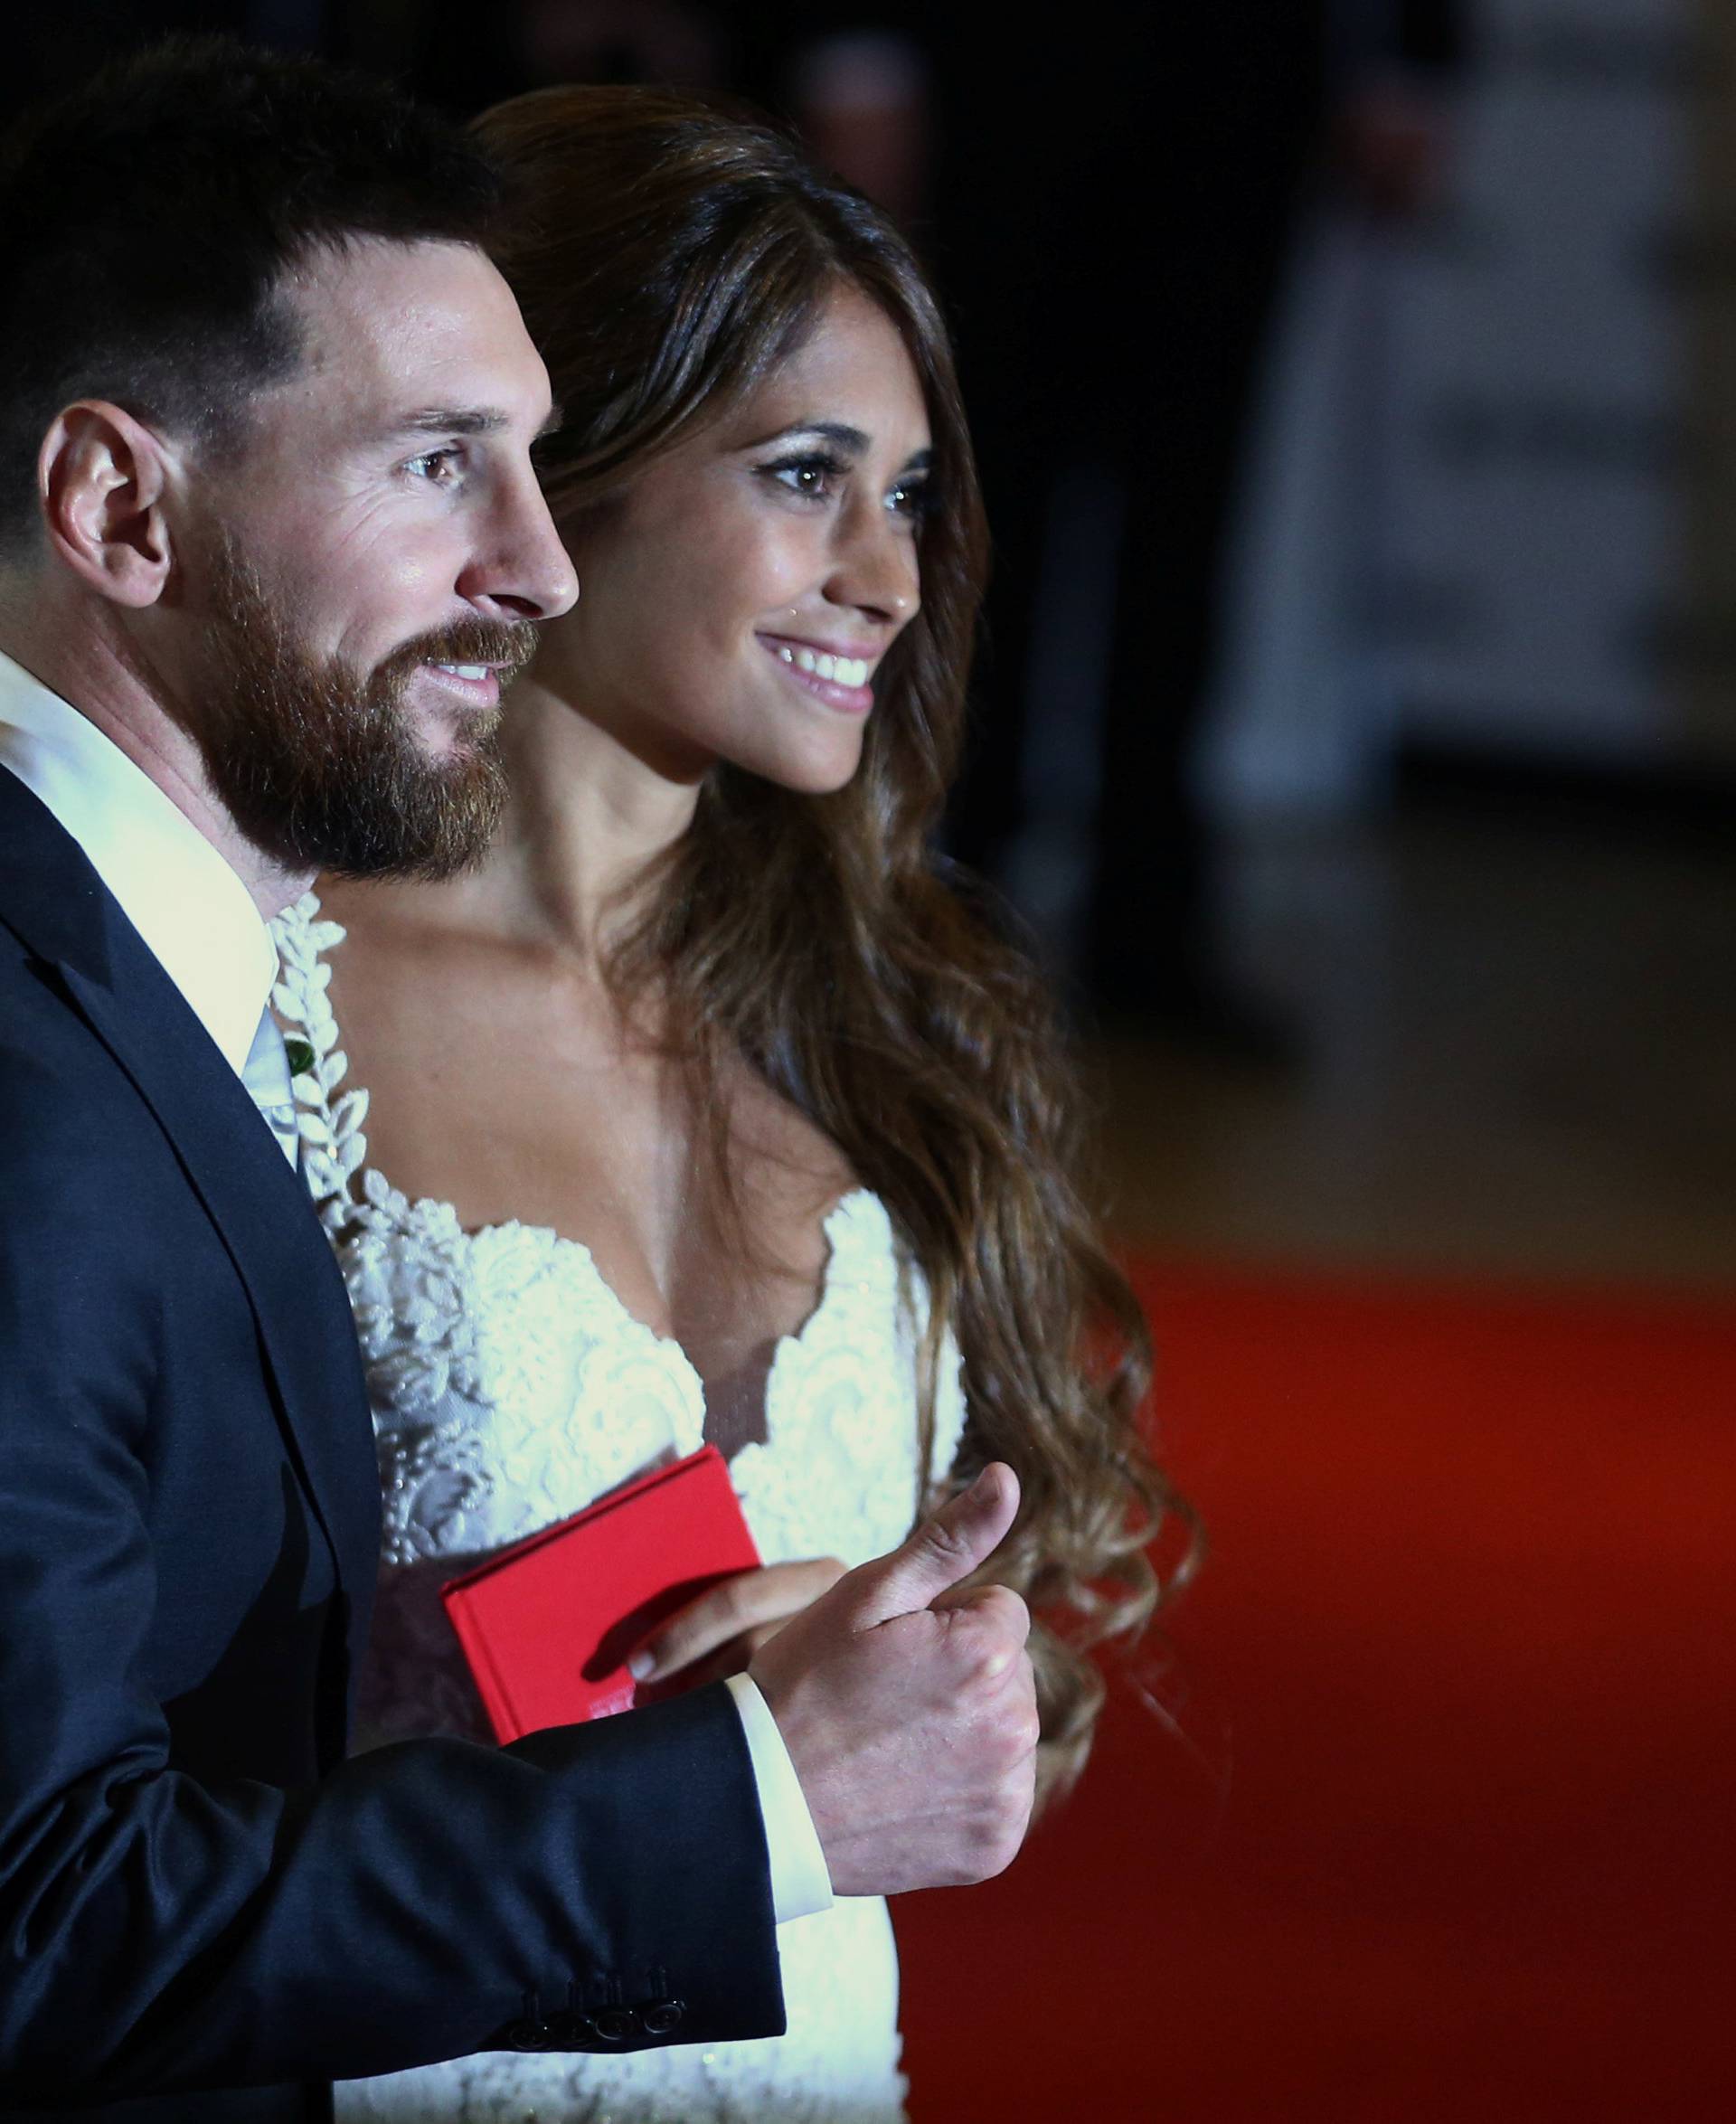 Argentine soccer player Lionel Messi and Antonela Roccuzzo pose at their wedding in Rosario